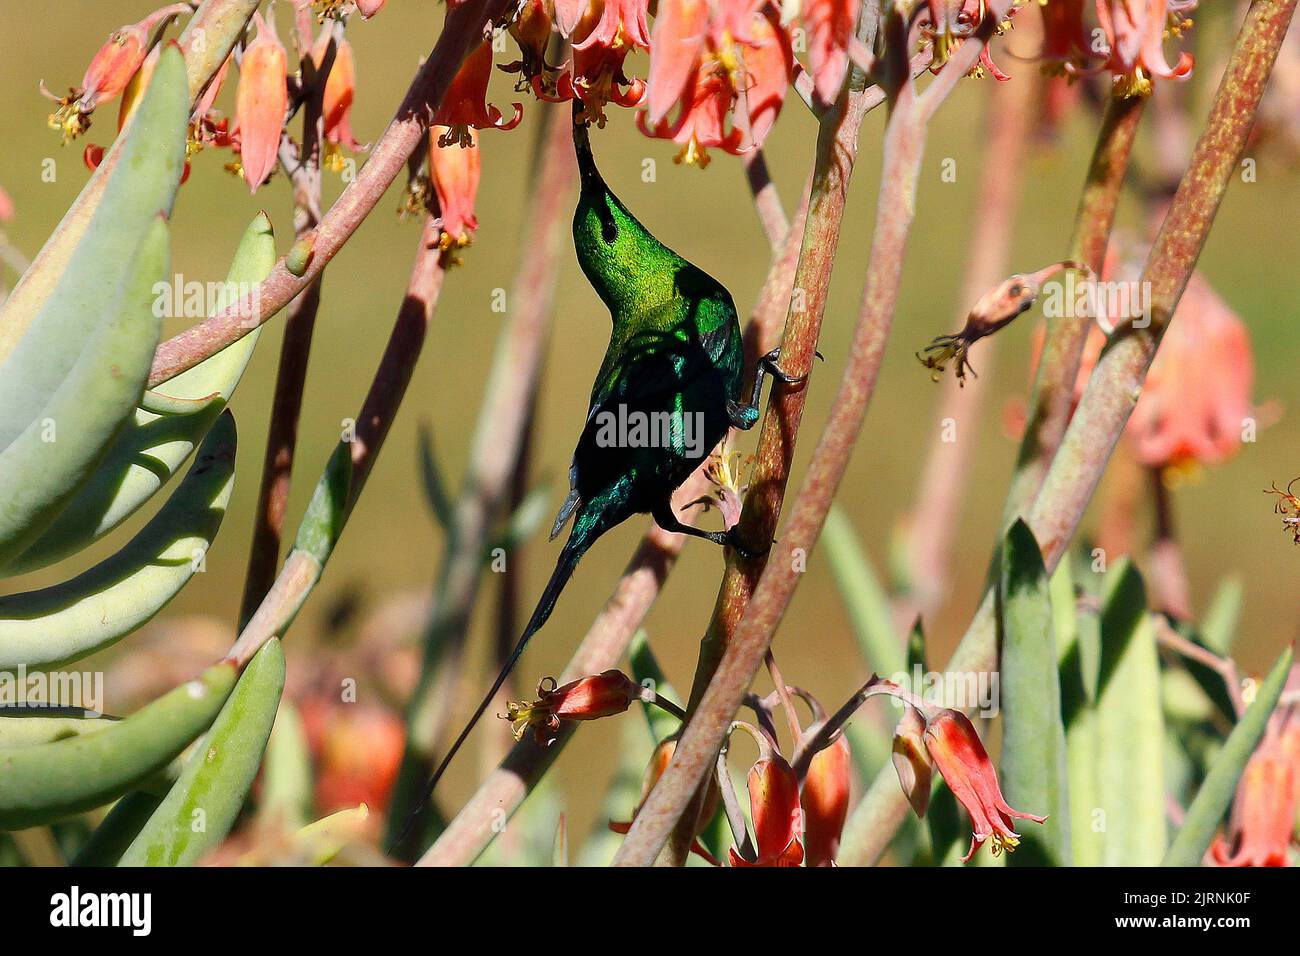 Acrobatic malachite sunbird using its long decurved beak to feed on flowers in a garden in Cape Town Stock Photo